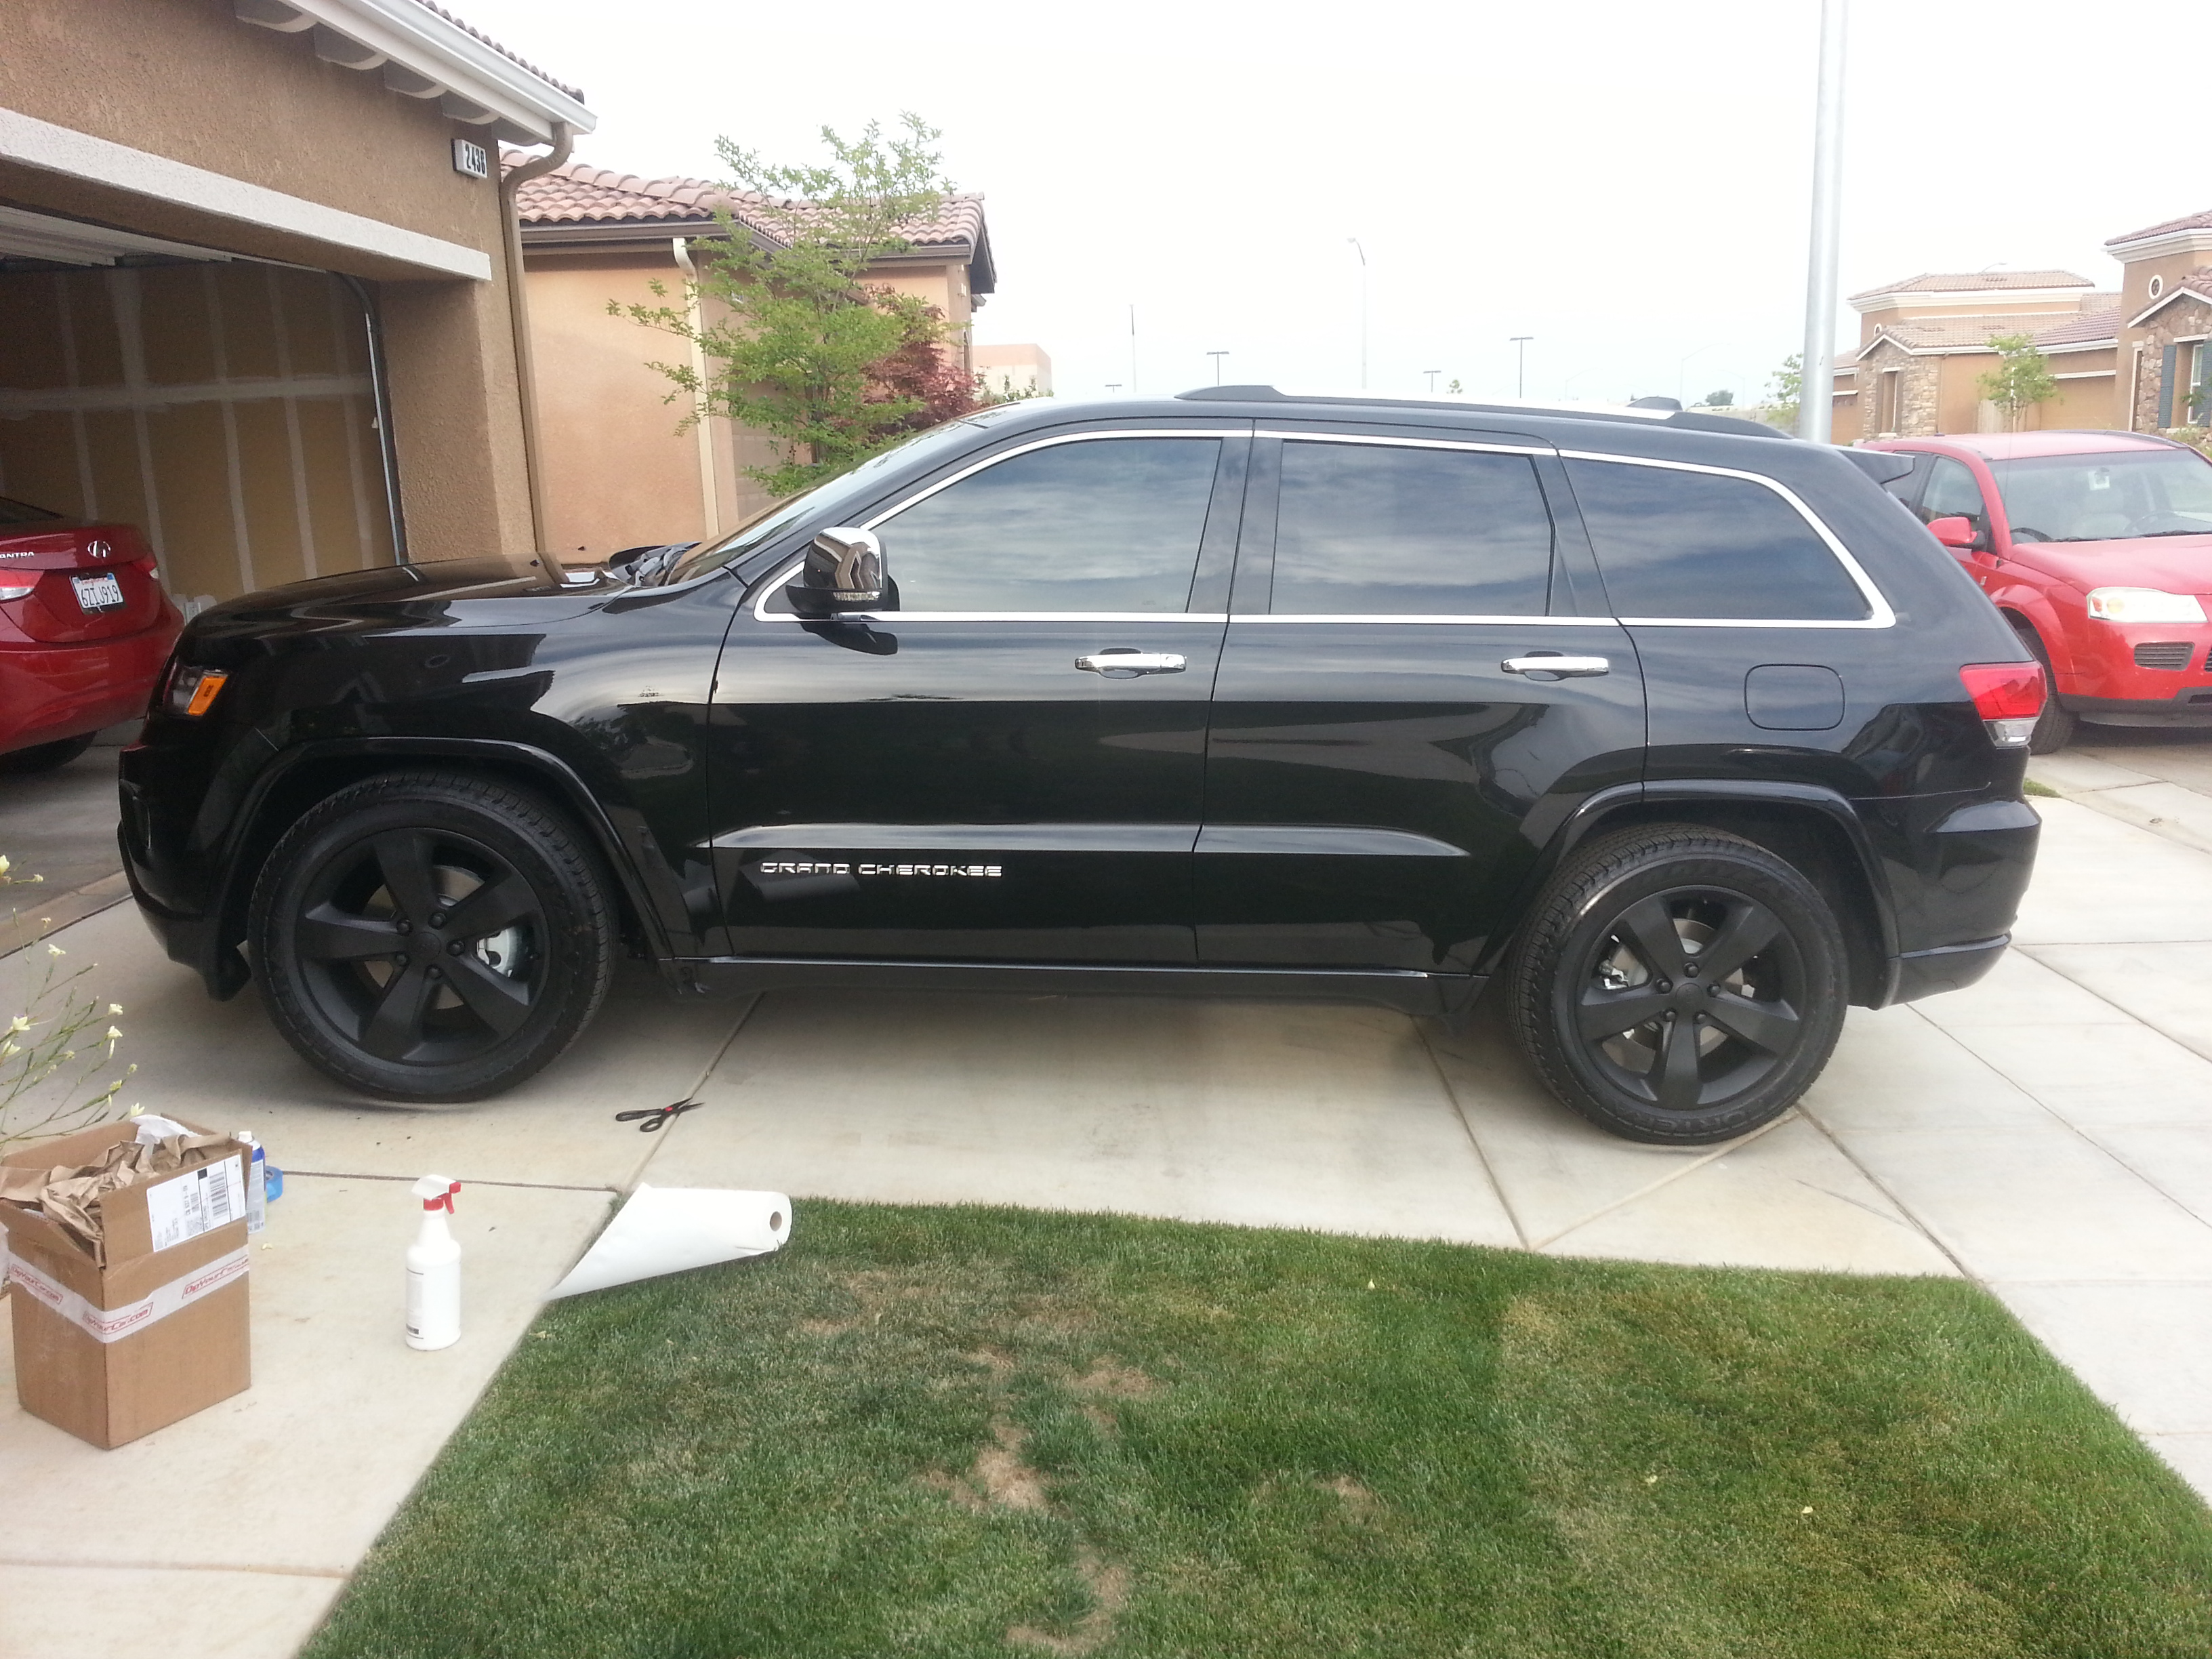 2012 Jeep grand cherokee srt8 lease rates #1